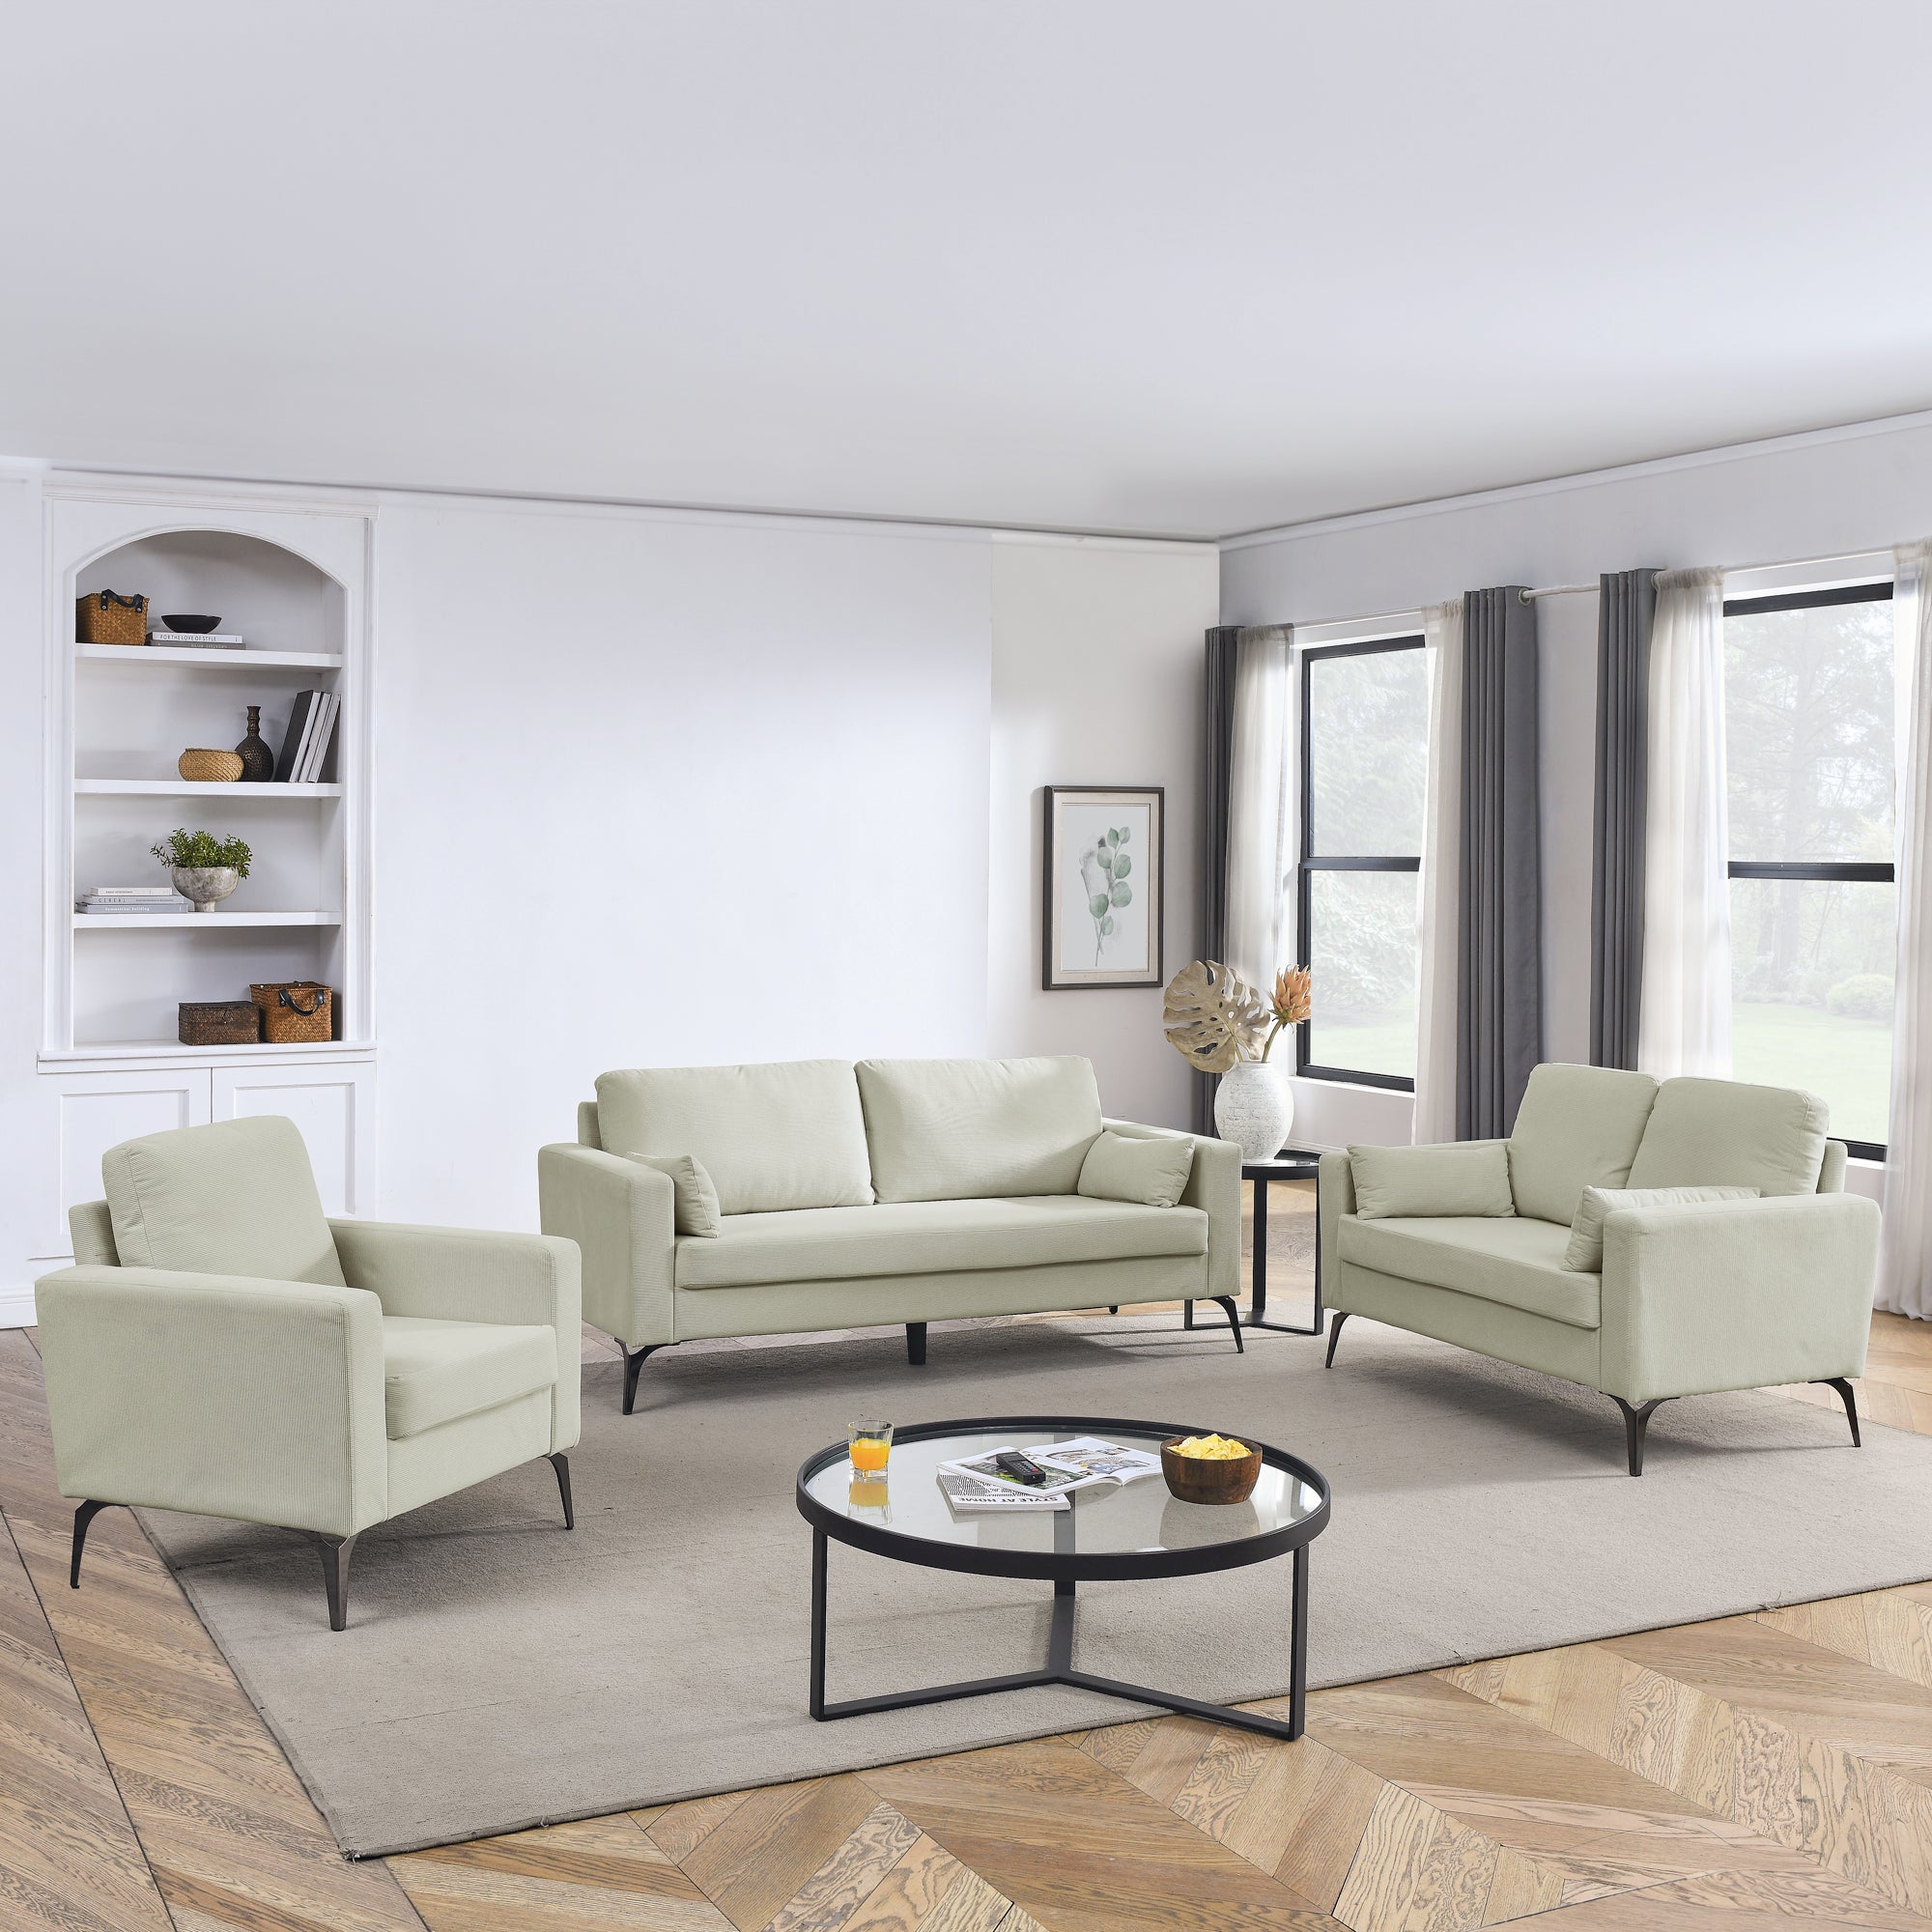 3 Piece Corduroy Sofa Set, including 3-Seater Sofa, Loveseat and Sofa Chair